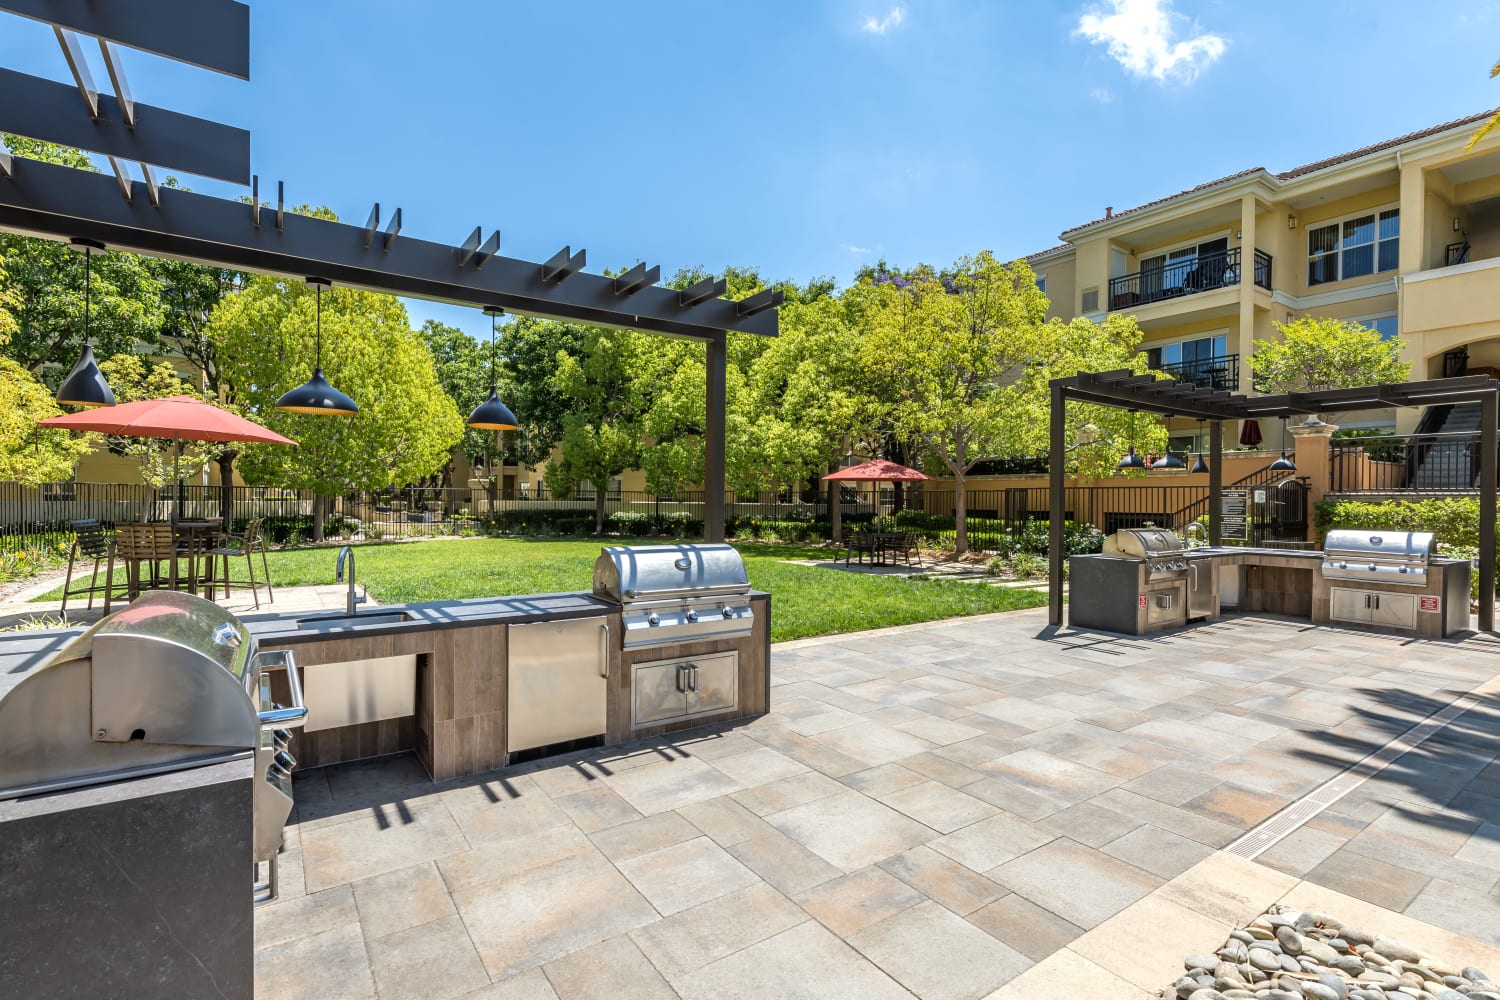 Exterior view of BBQ and lounge area at The Carlyle Apartments in Santa Clara